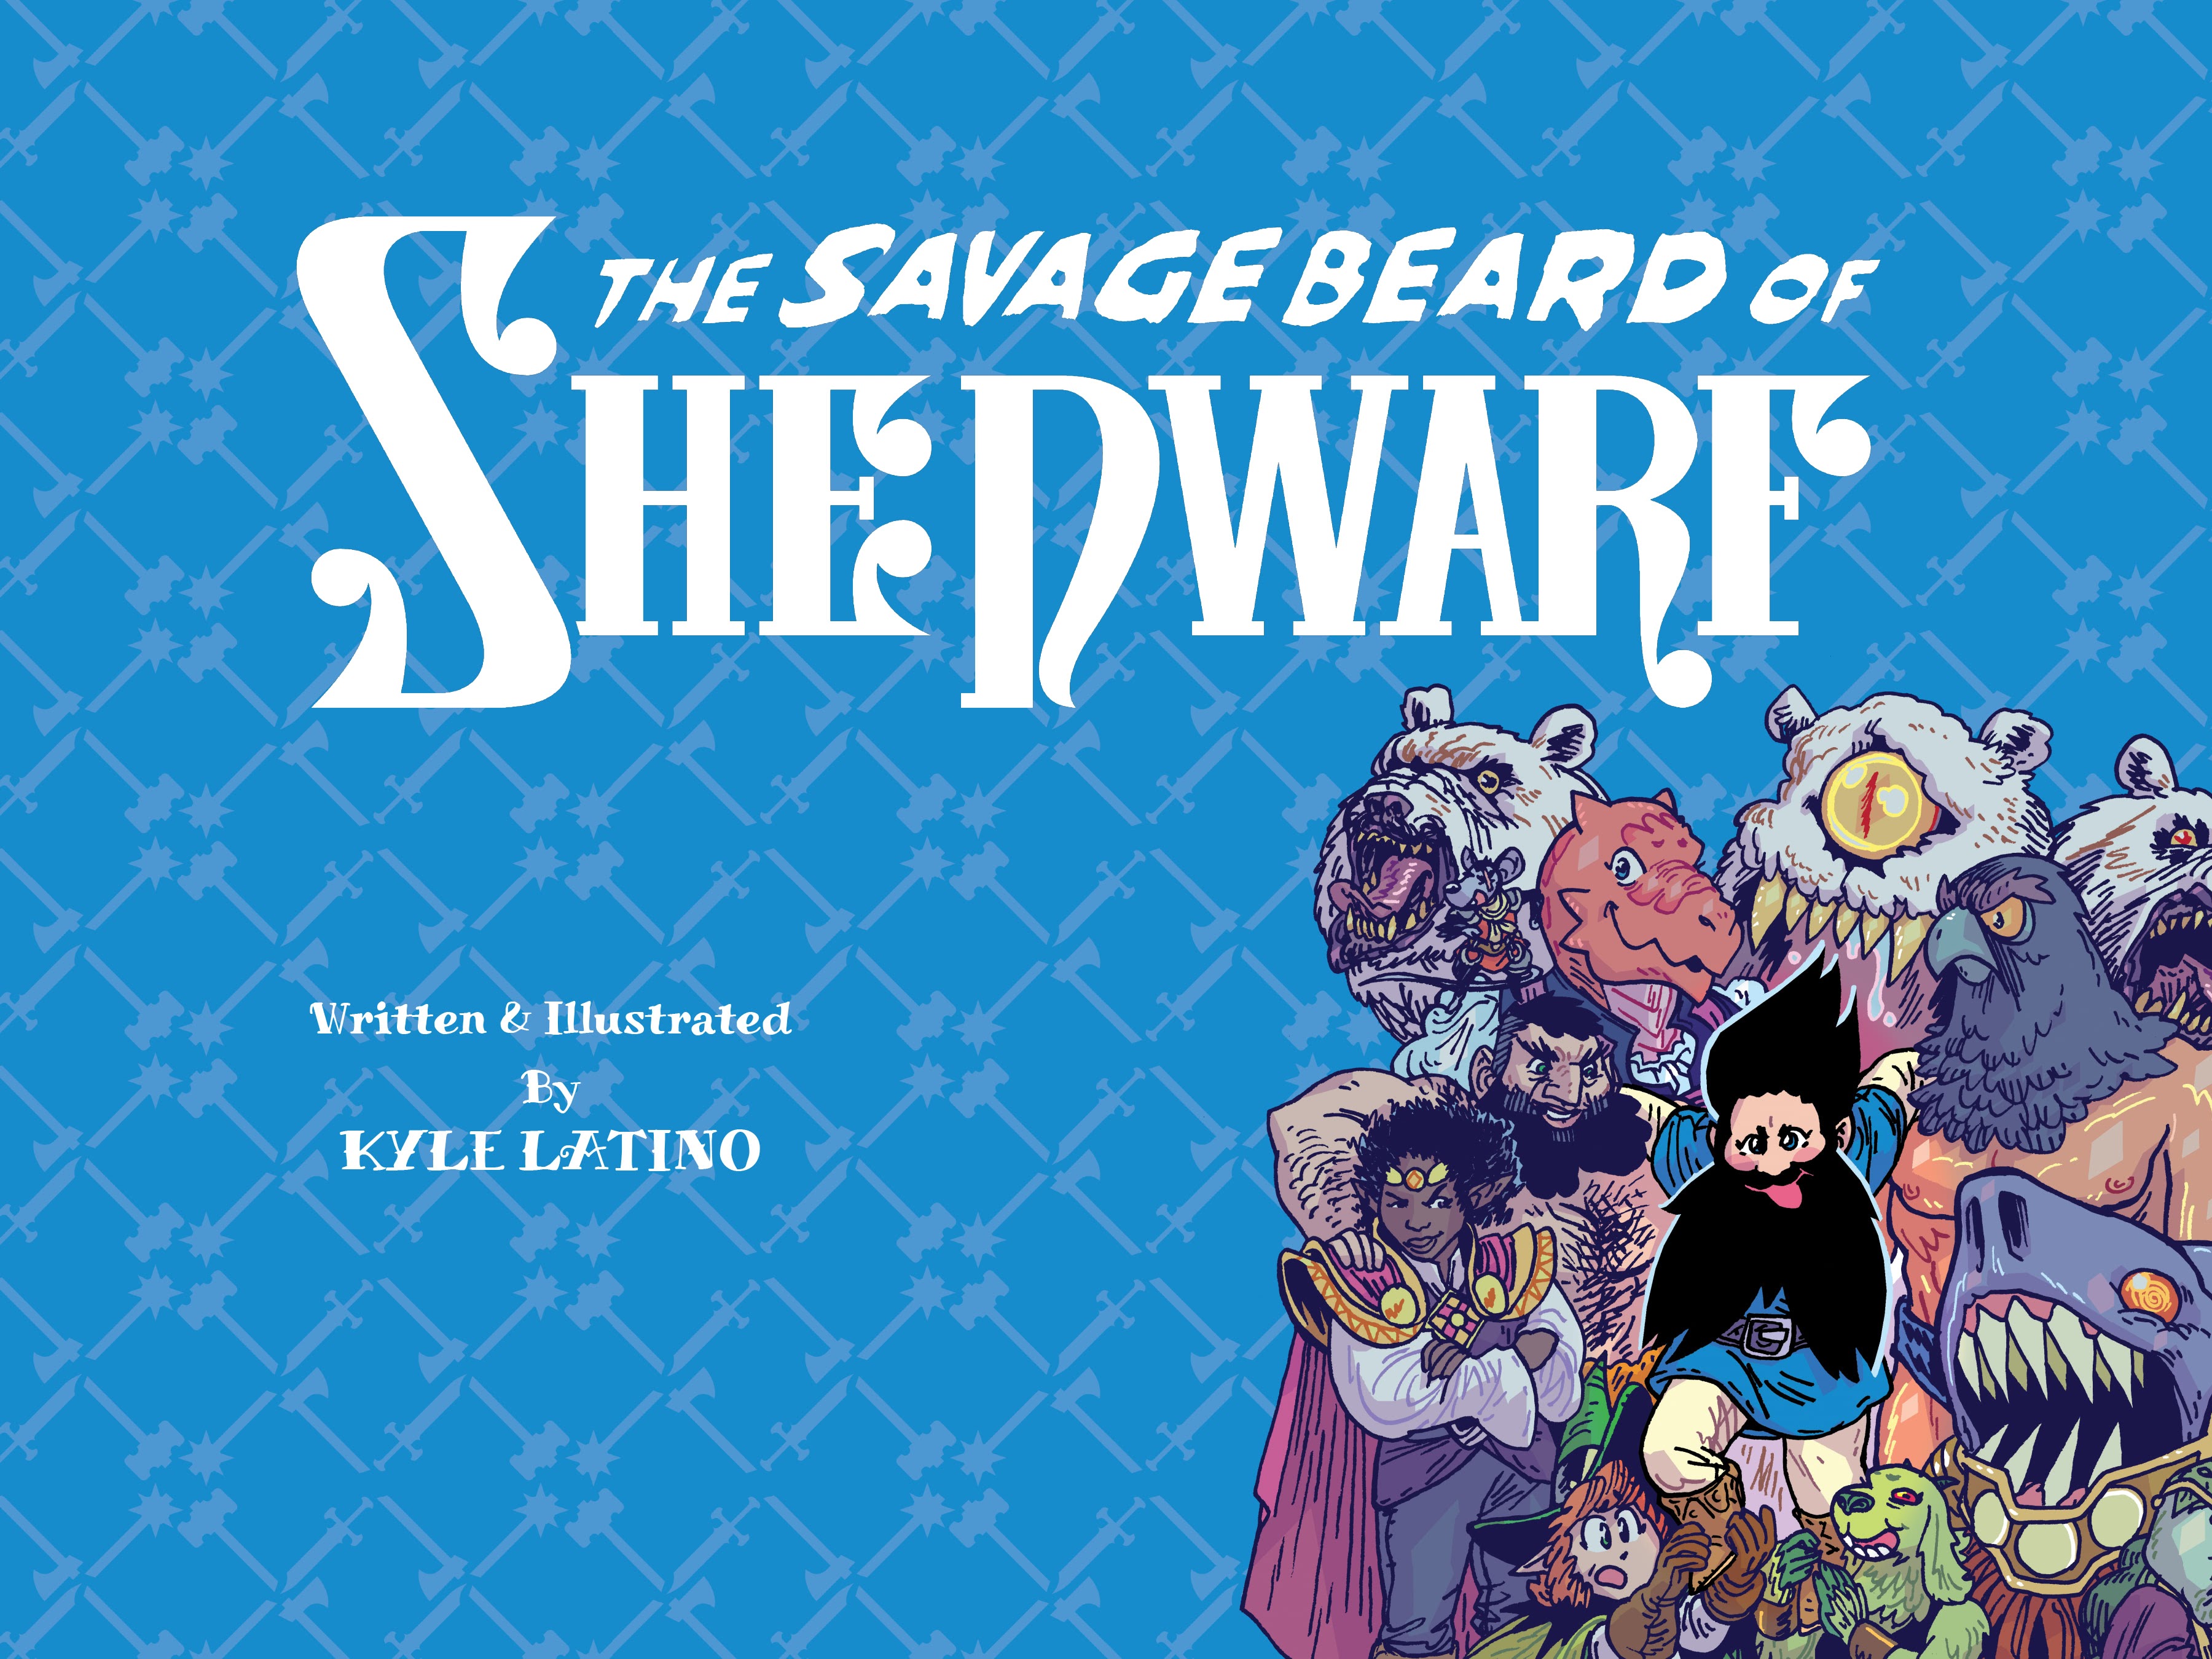 Read online The Savage Beard of She Dwarf comic -  Issue # TPB (Part 1) - 3